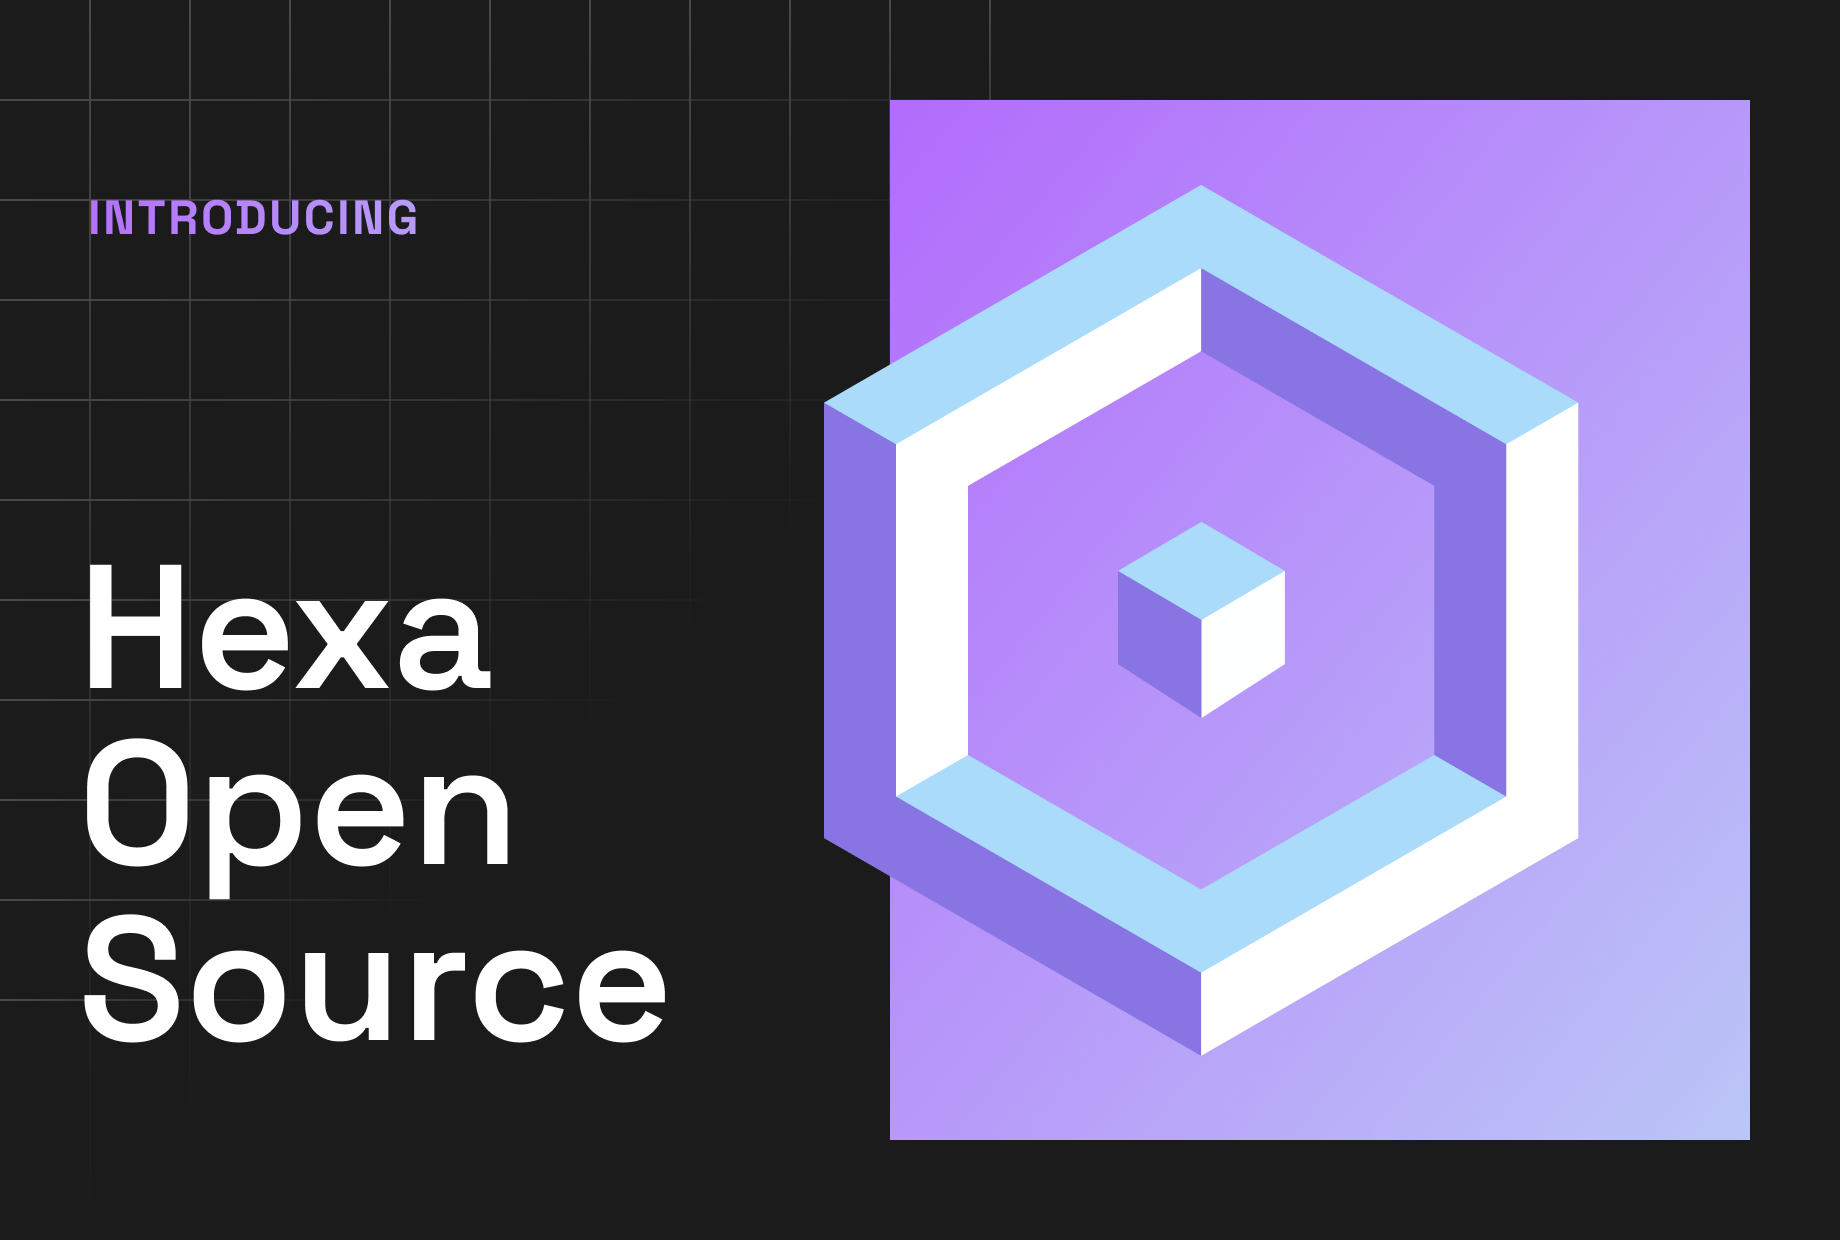 We’re launching Hexa Open Source to bring trust and transparency to software’s core